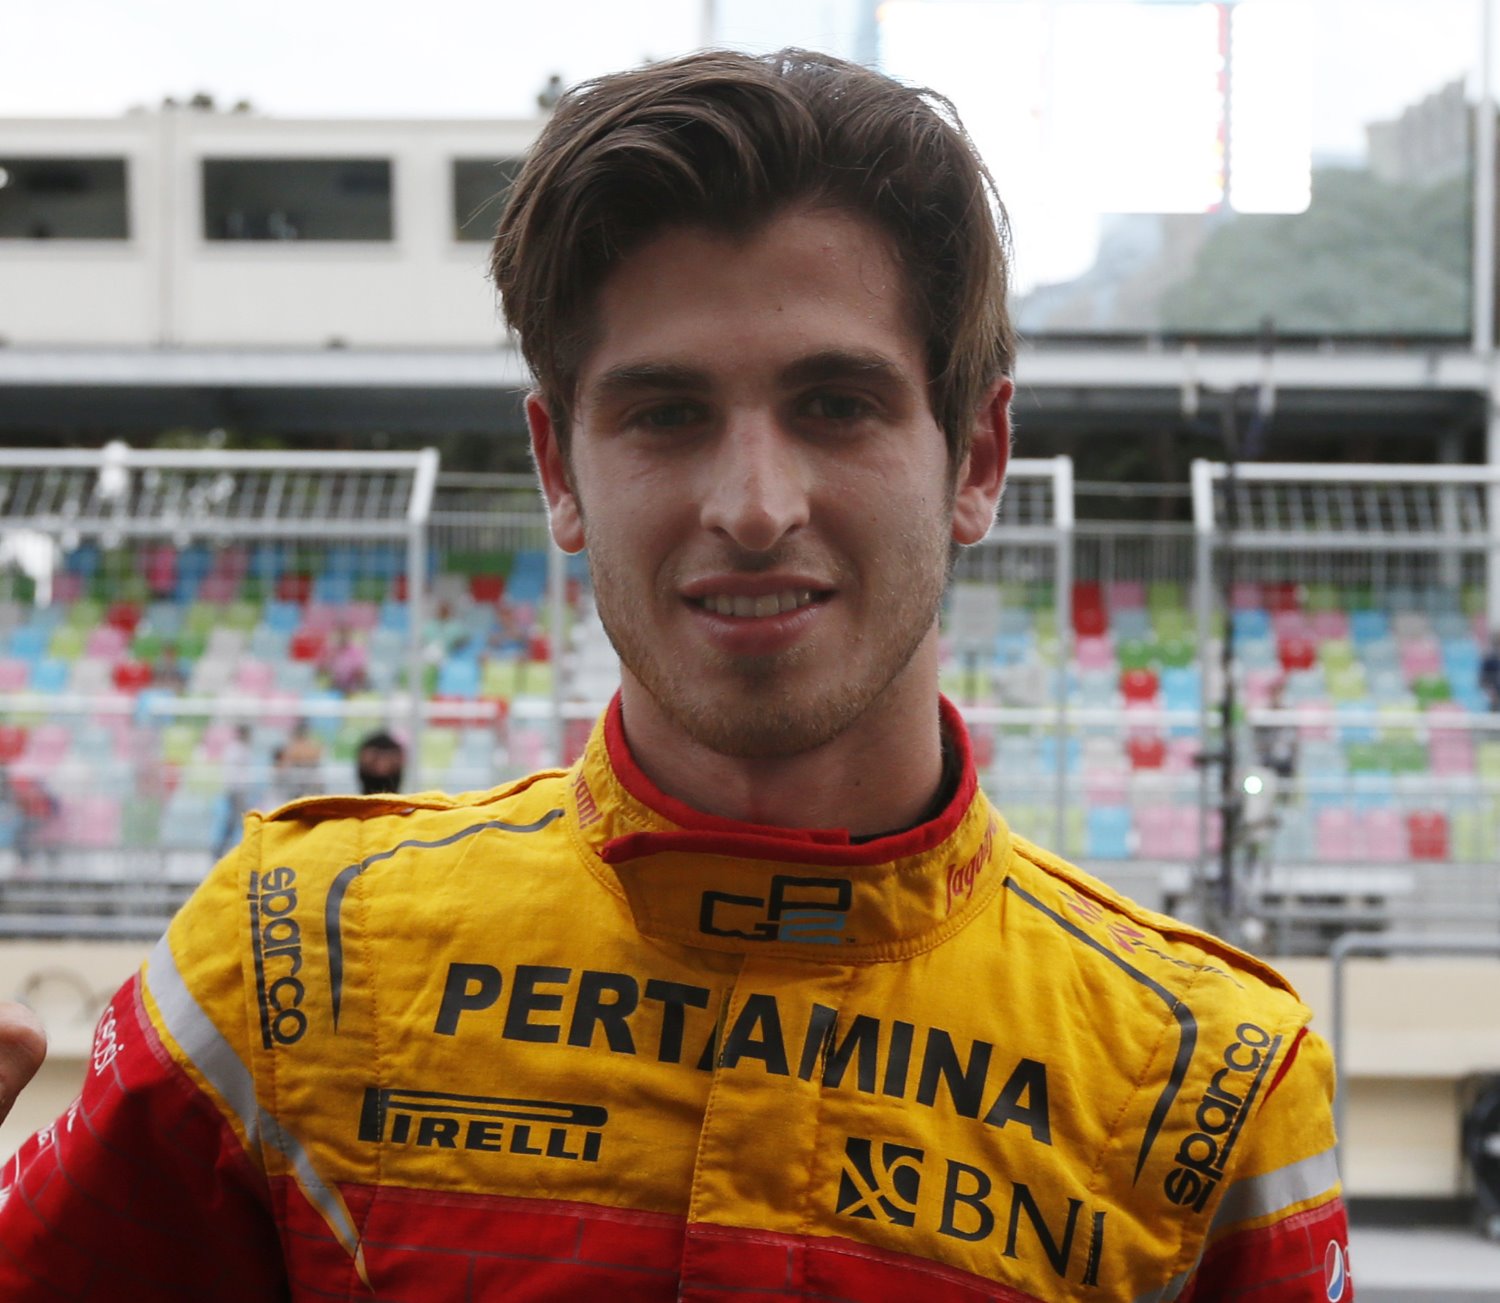 Ferrari has no junior team for Antonio Giovinazzi but could place him with the Haas team like they did Guttierez